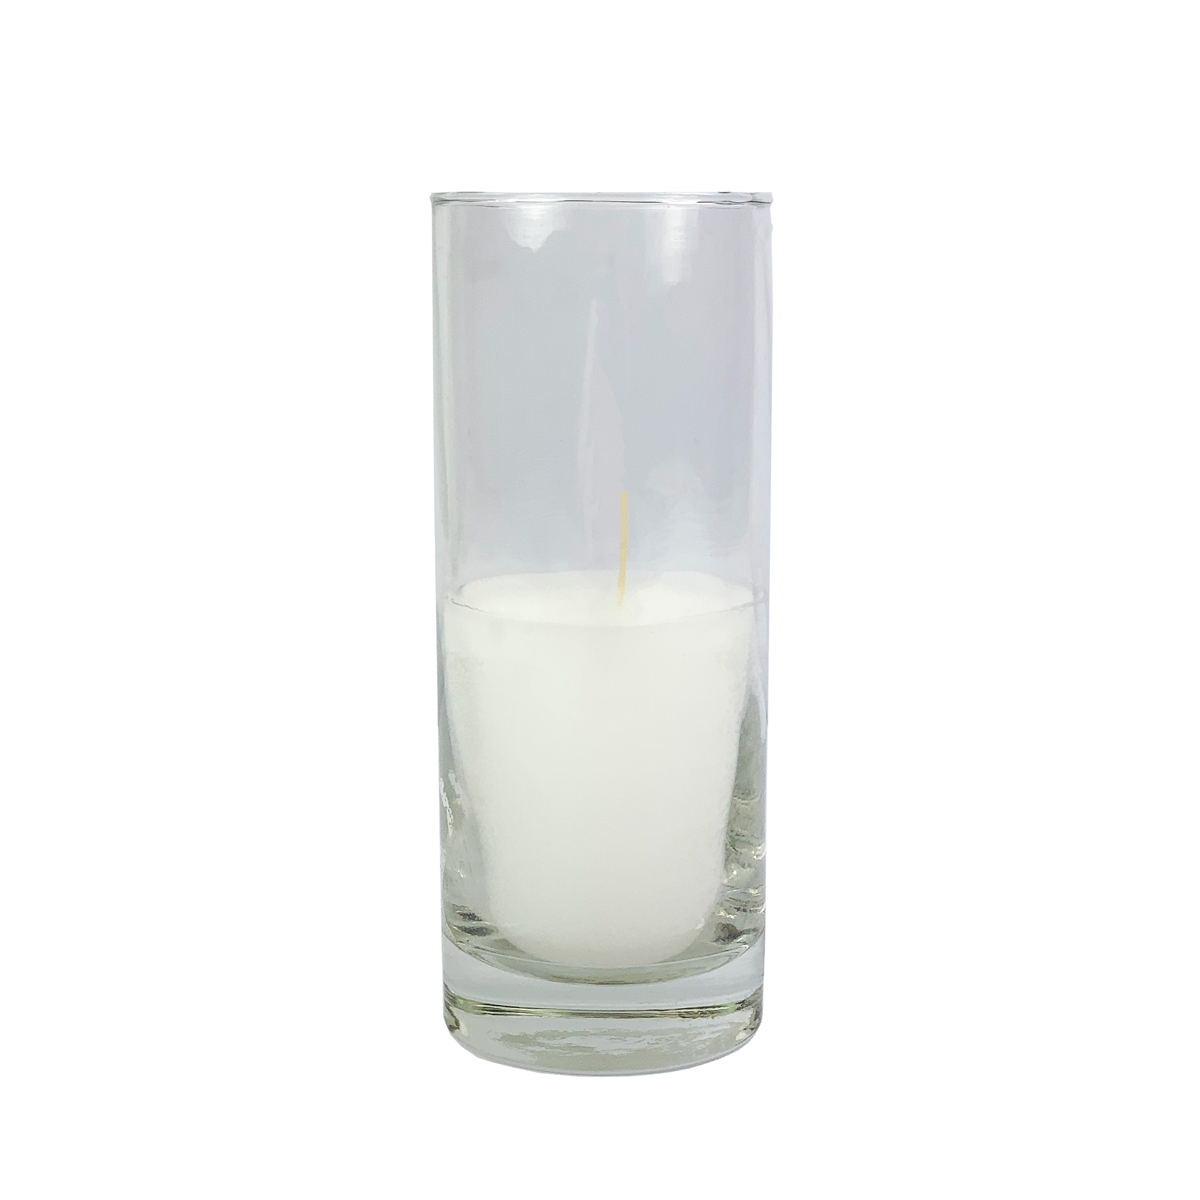 CLEAR REFILL GLASS CANDLES